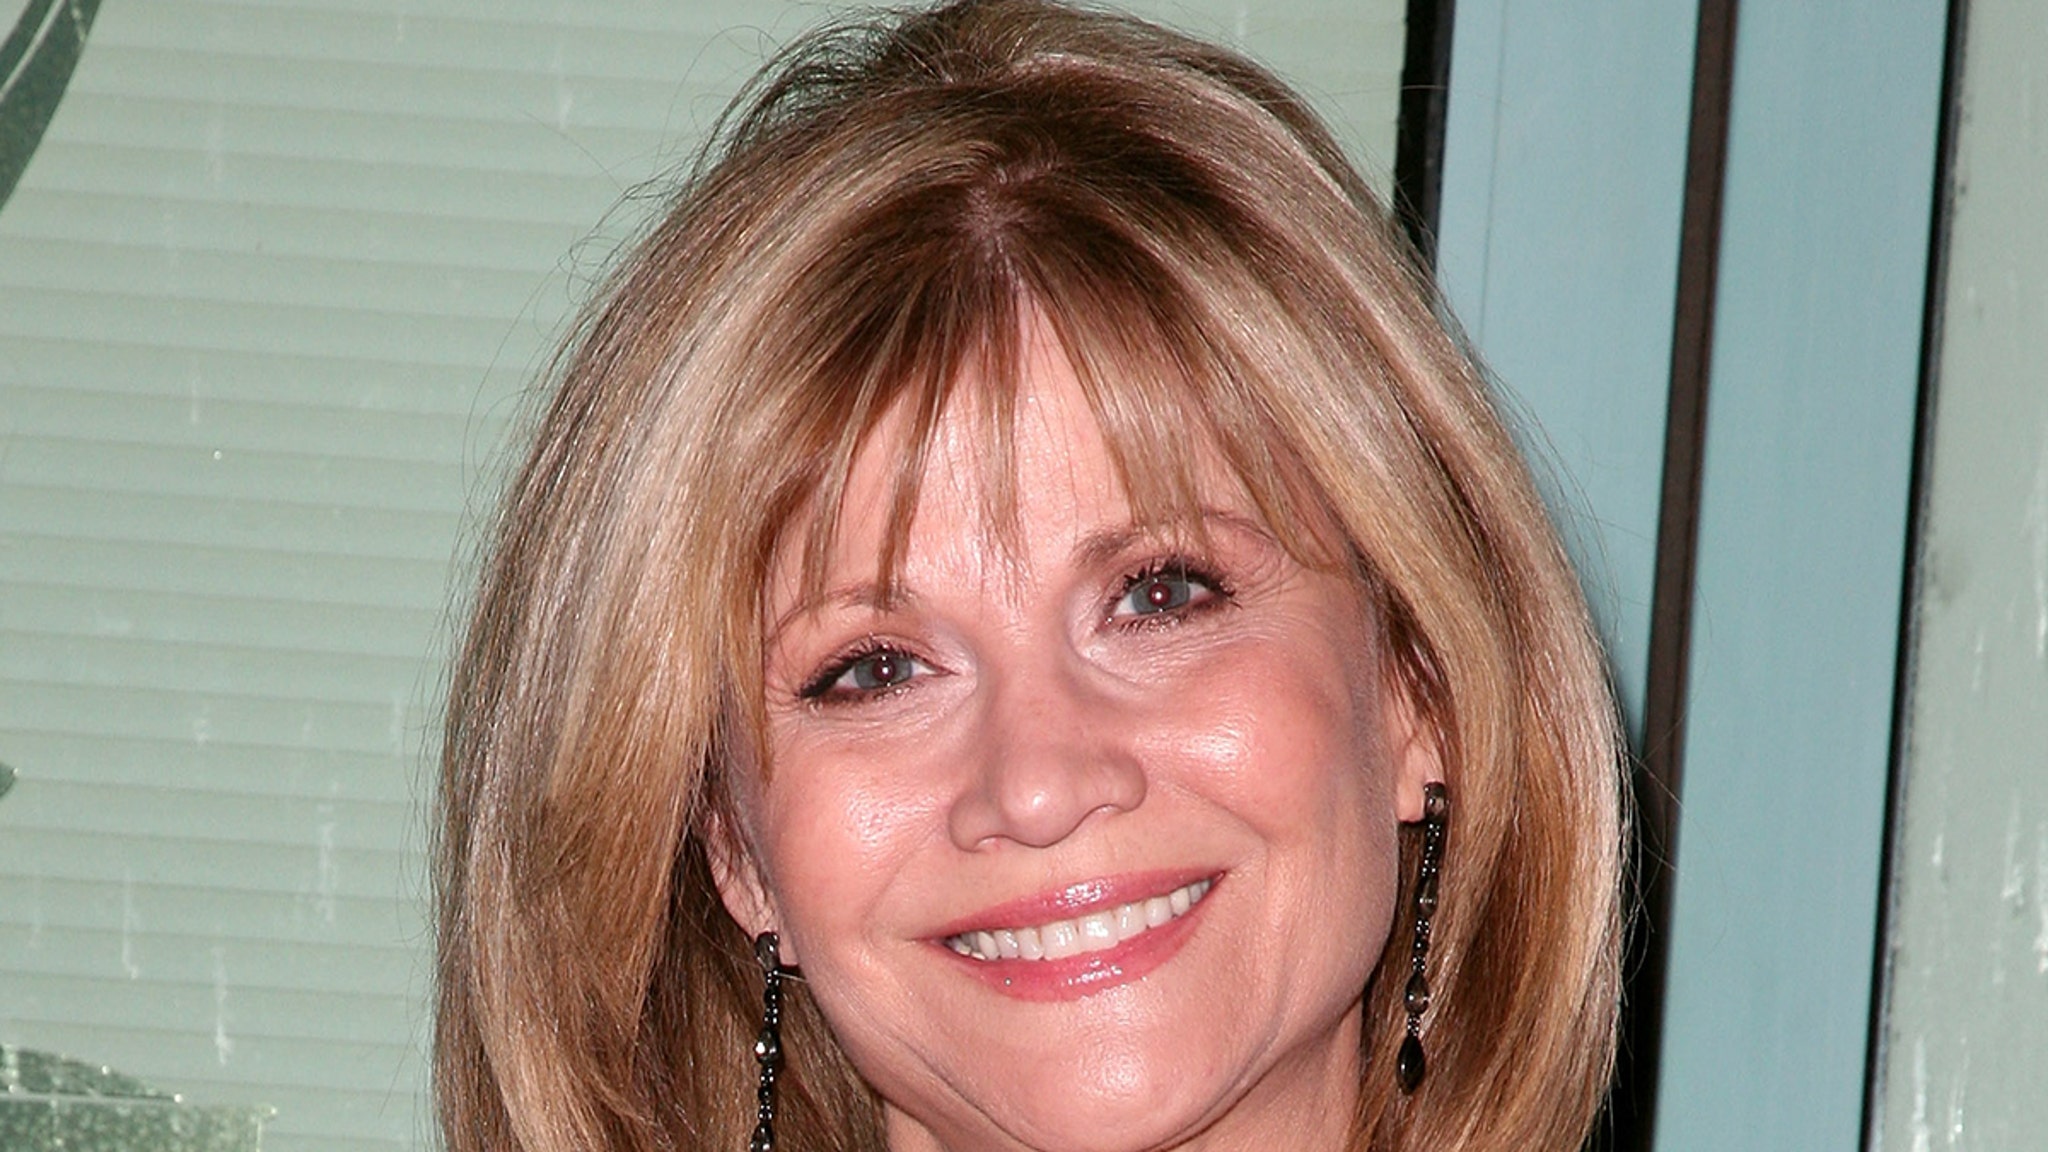 Markie Post Who Starred in 'Night Court' Dead at 70